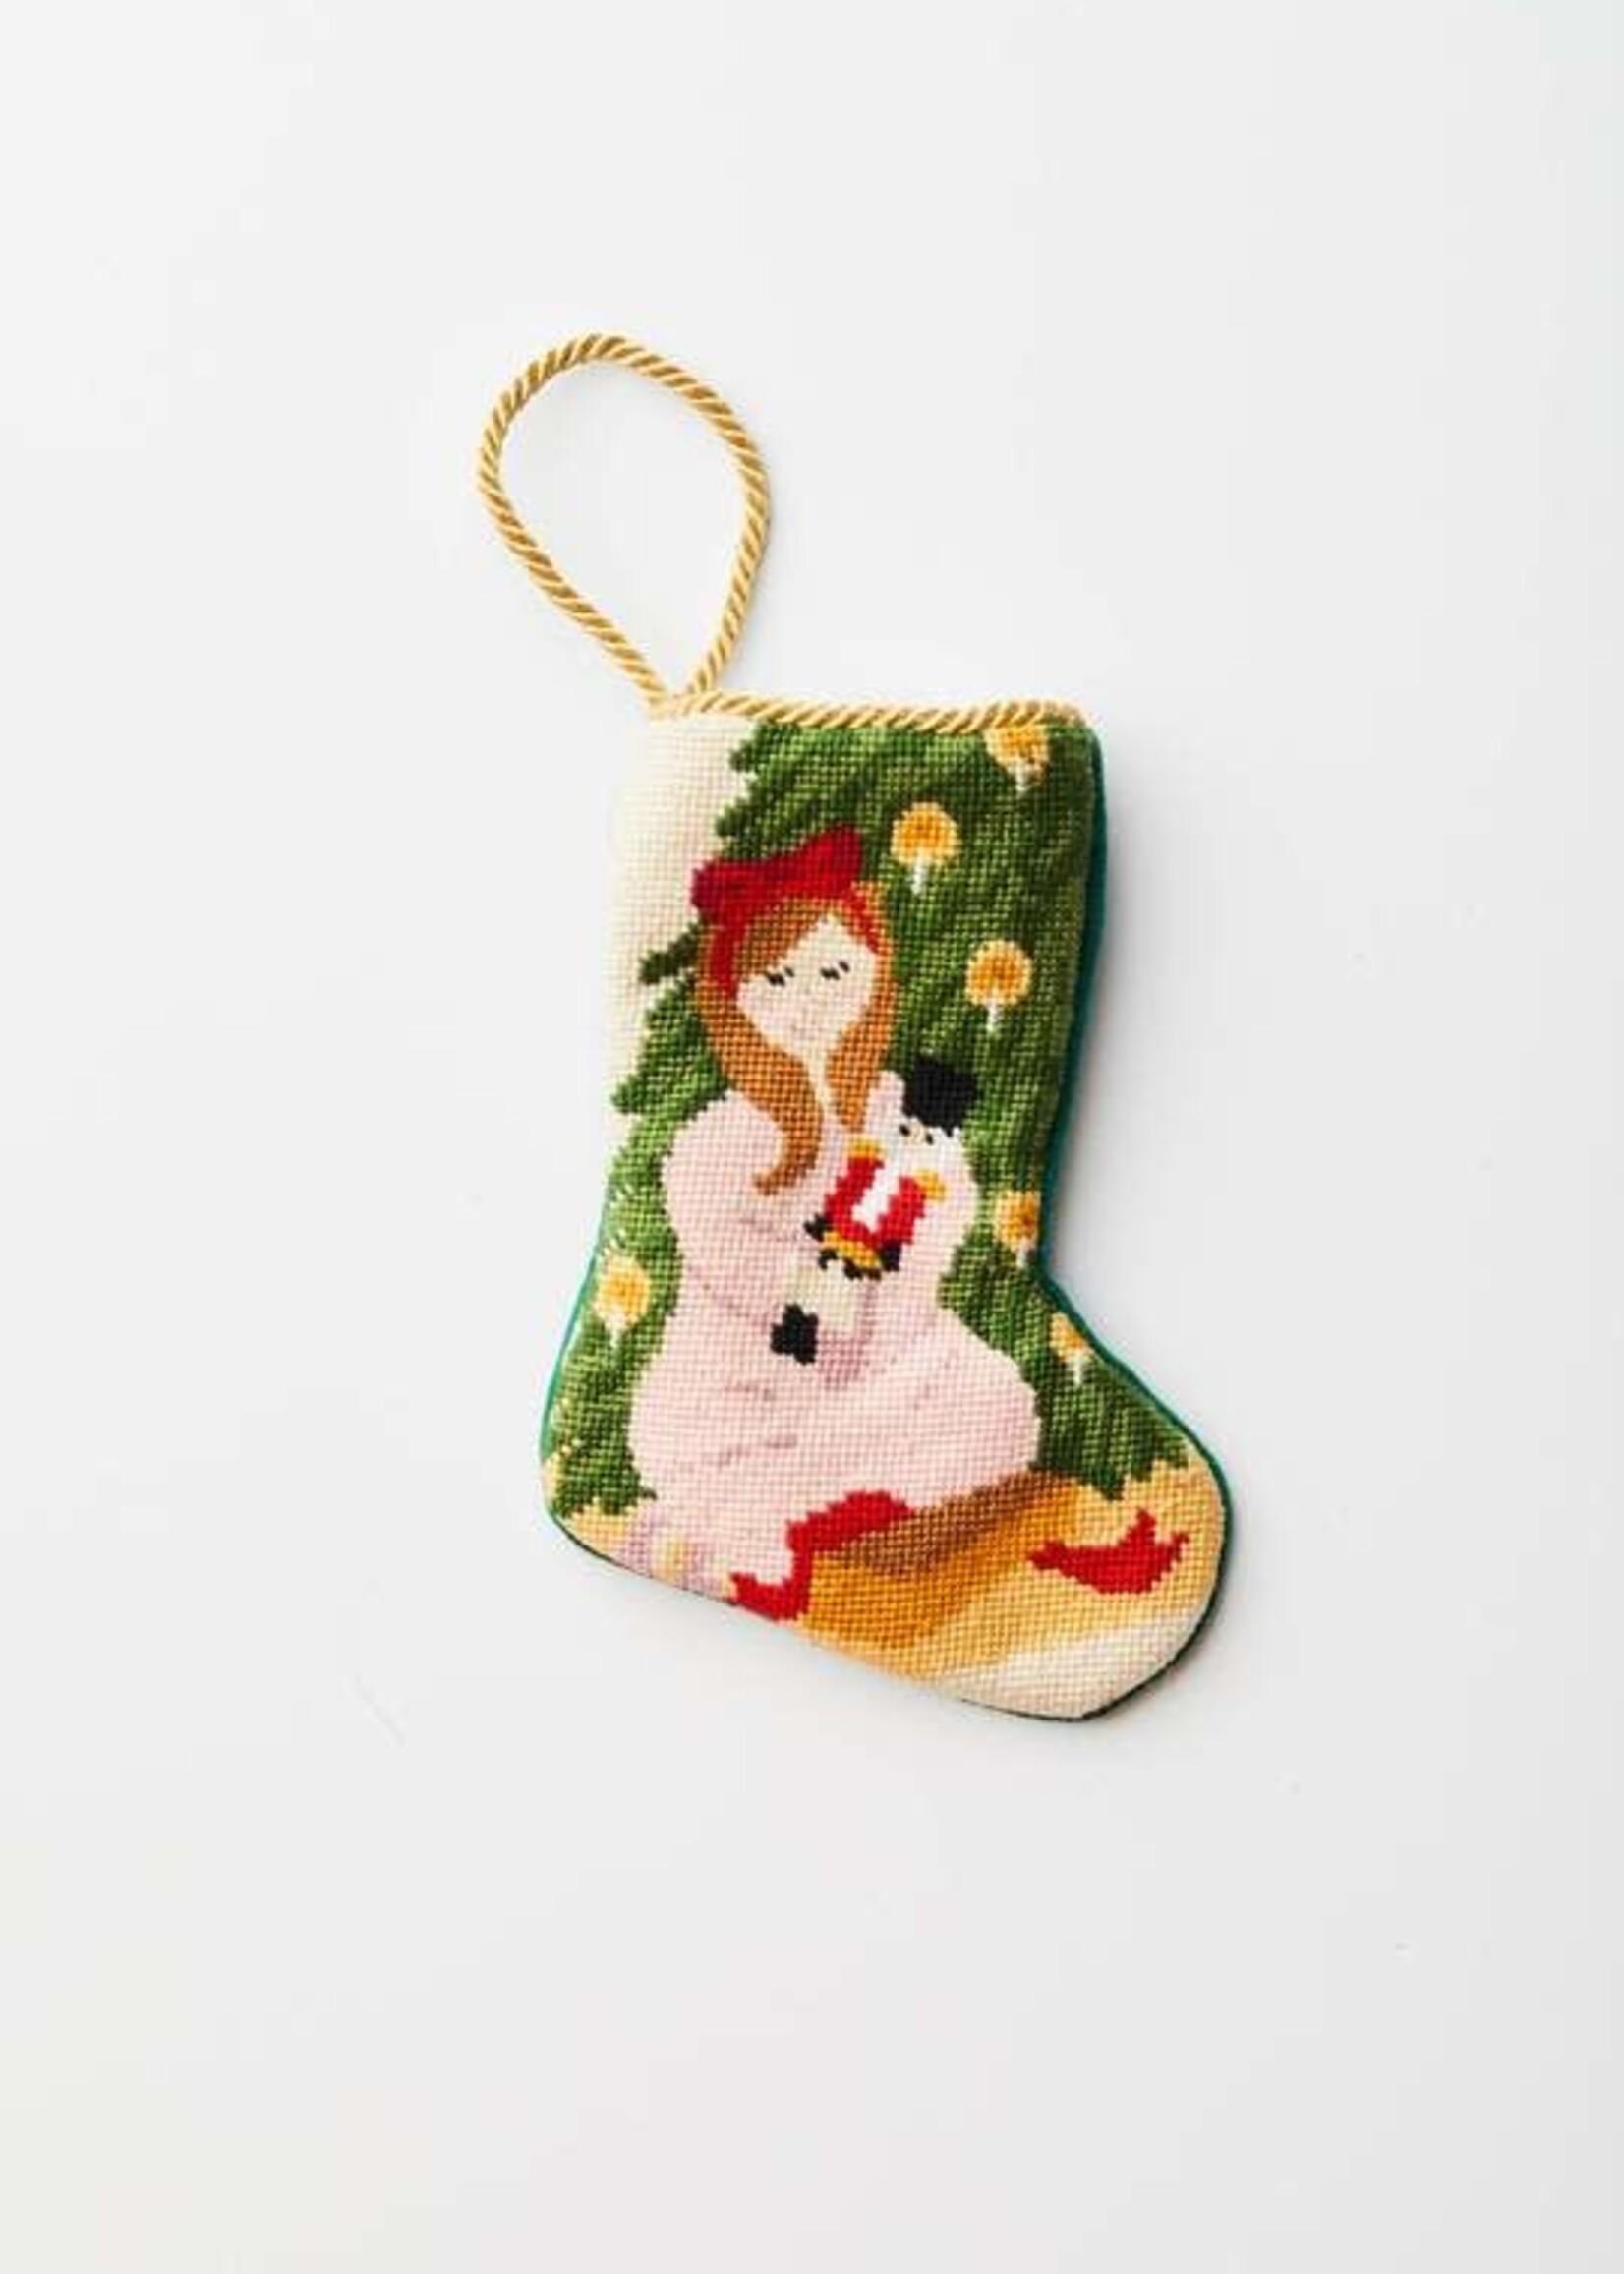 Bauble Stockings Bauble Stocking Clara with Nutcracker